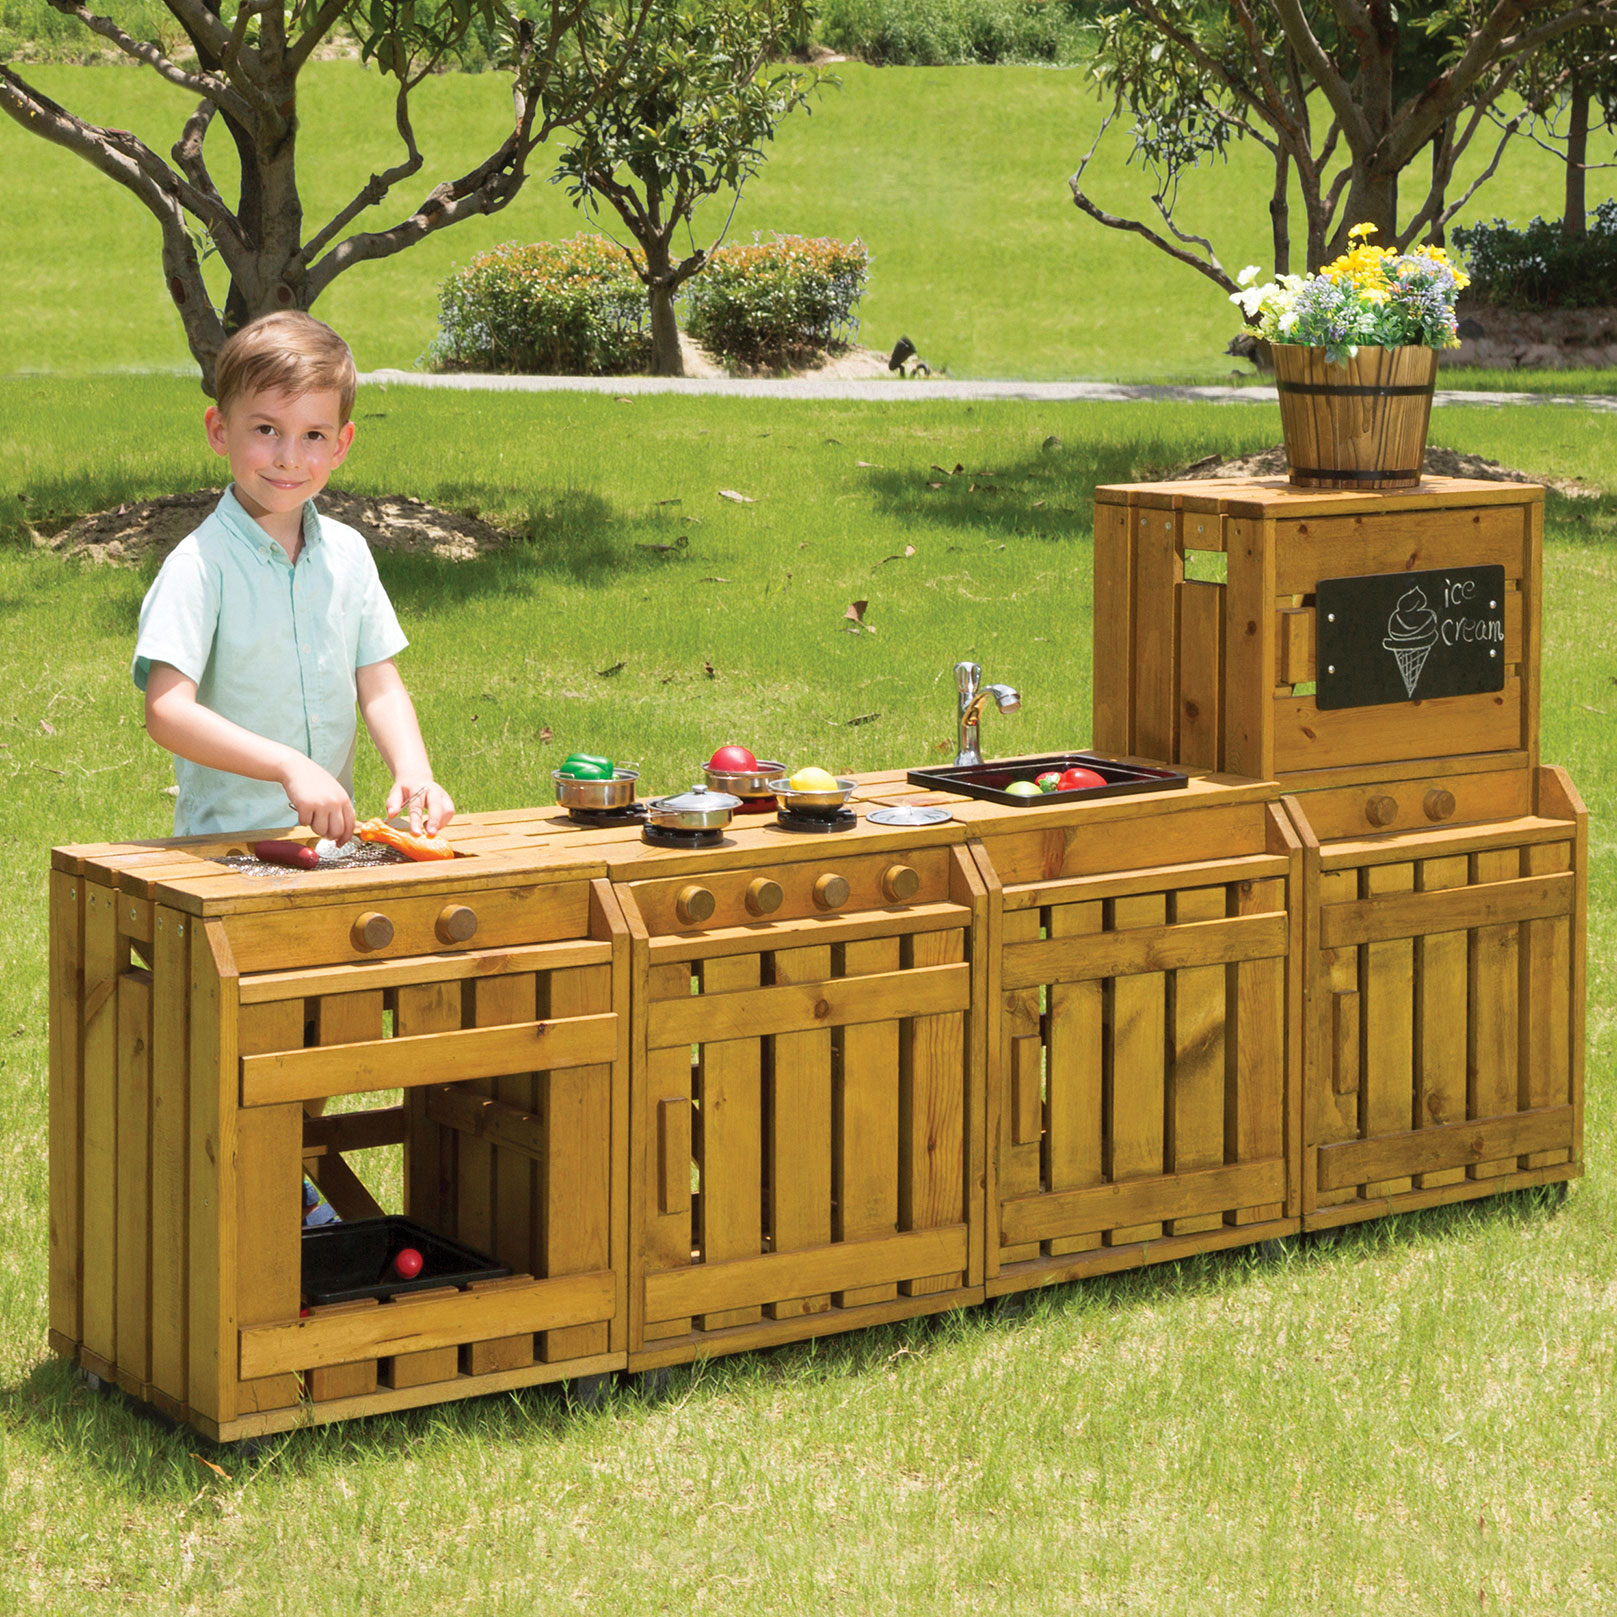 Children's Outdoor Role-Play